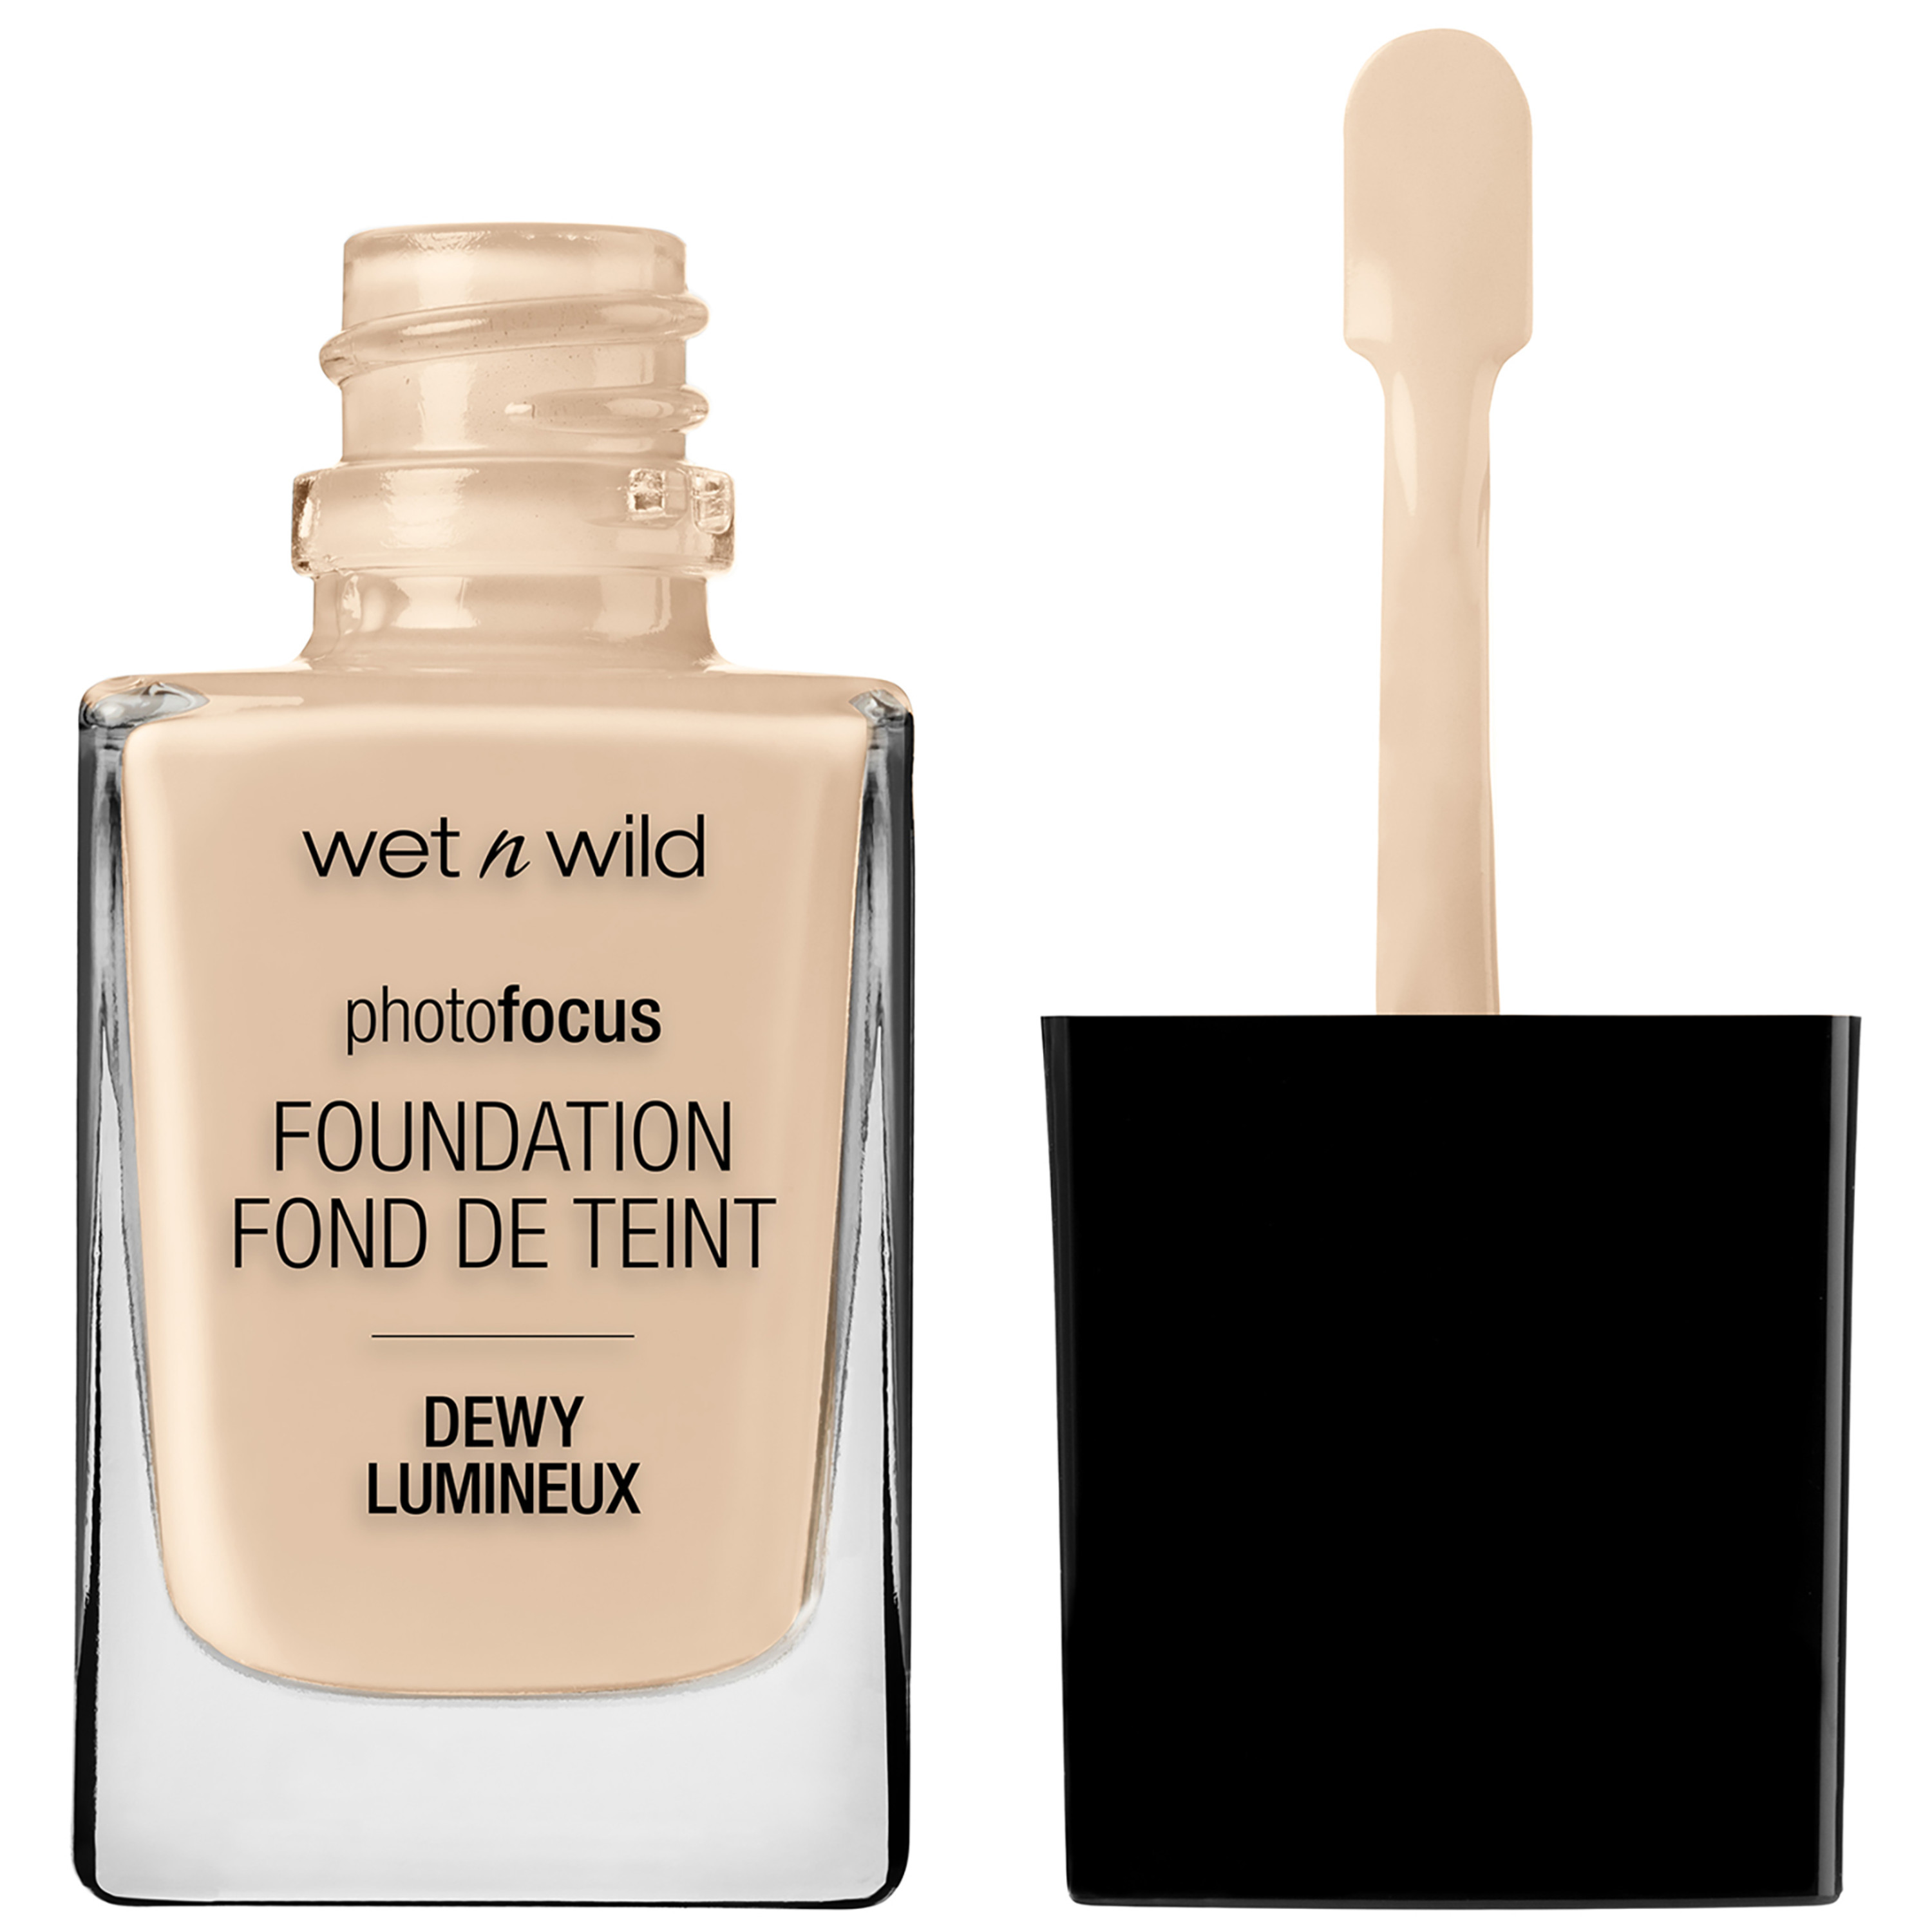 wet n wild Photo Focus Dewy Foundation, Soft Ivory - image 1 of 4